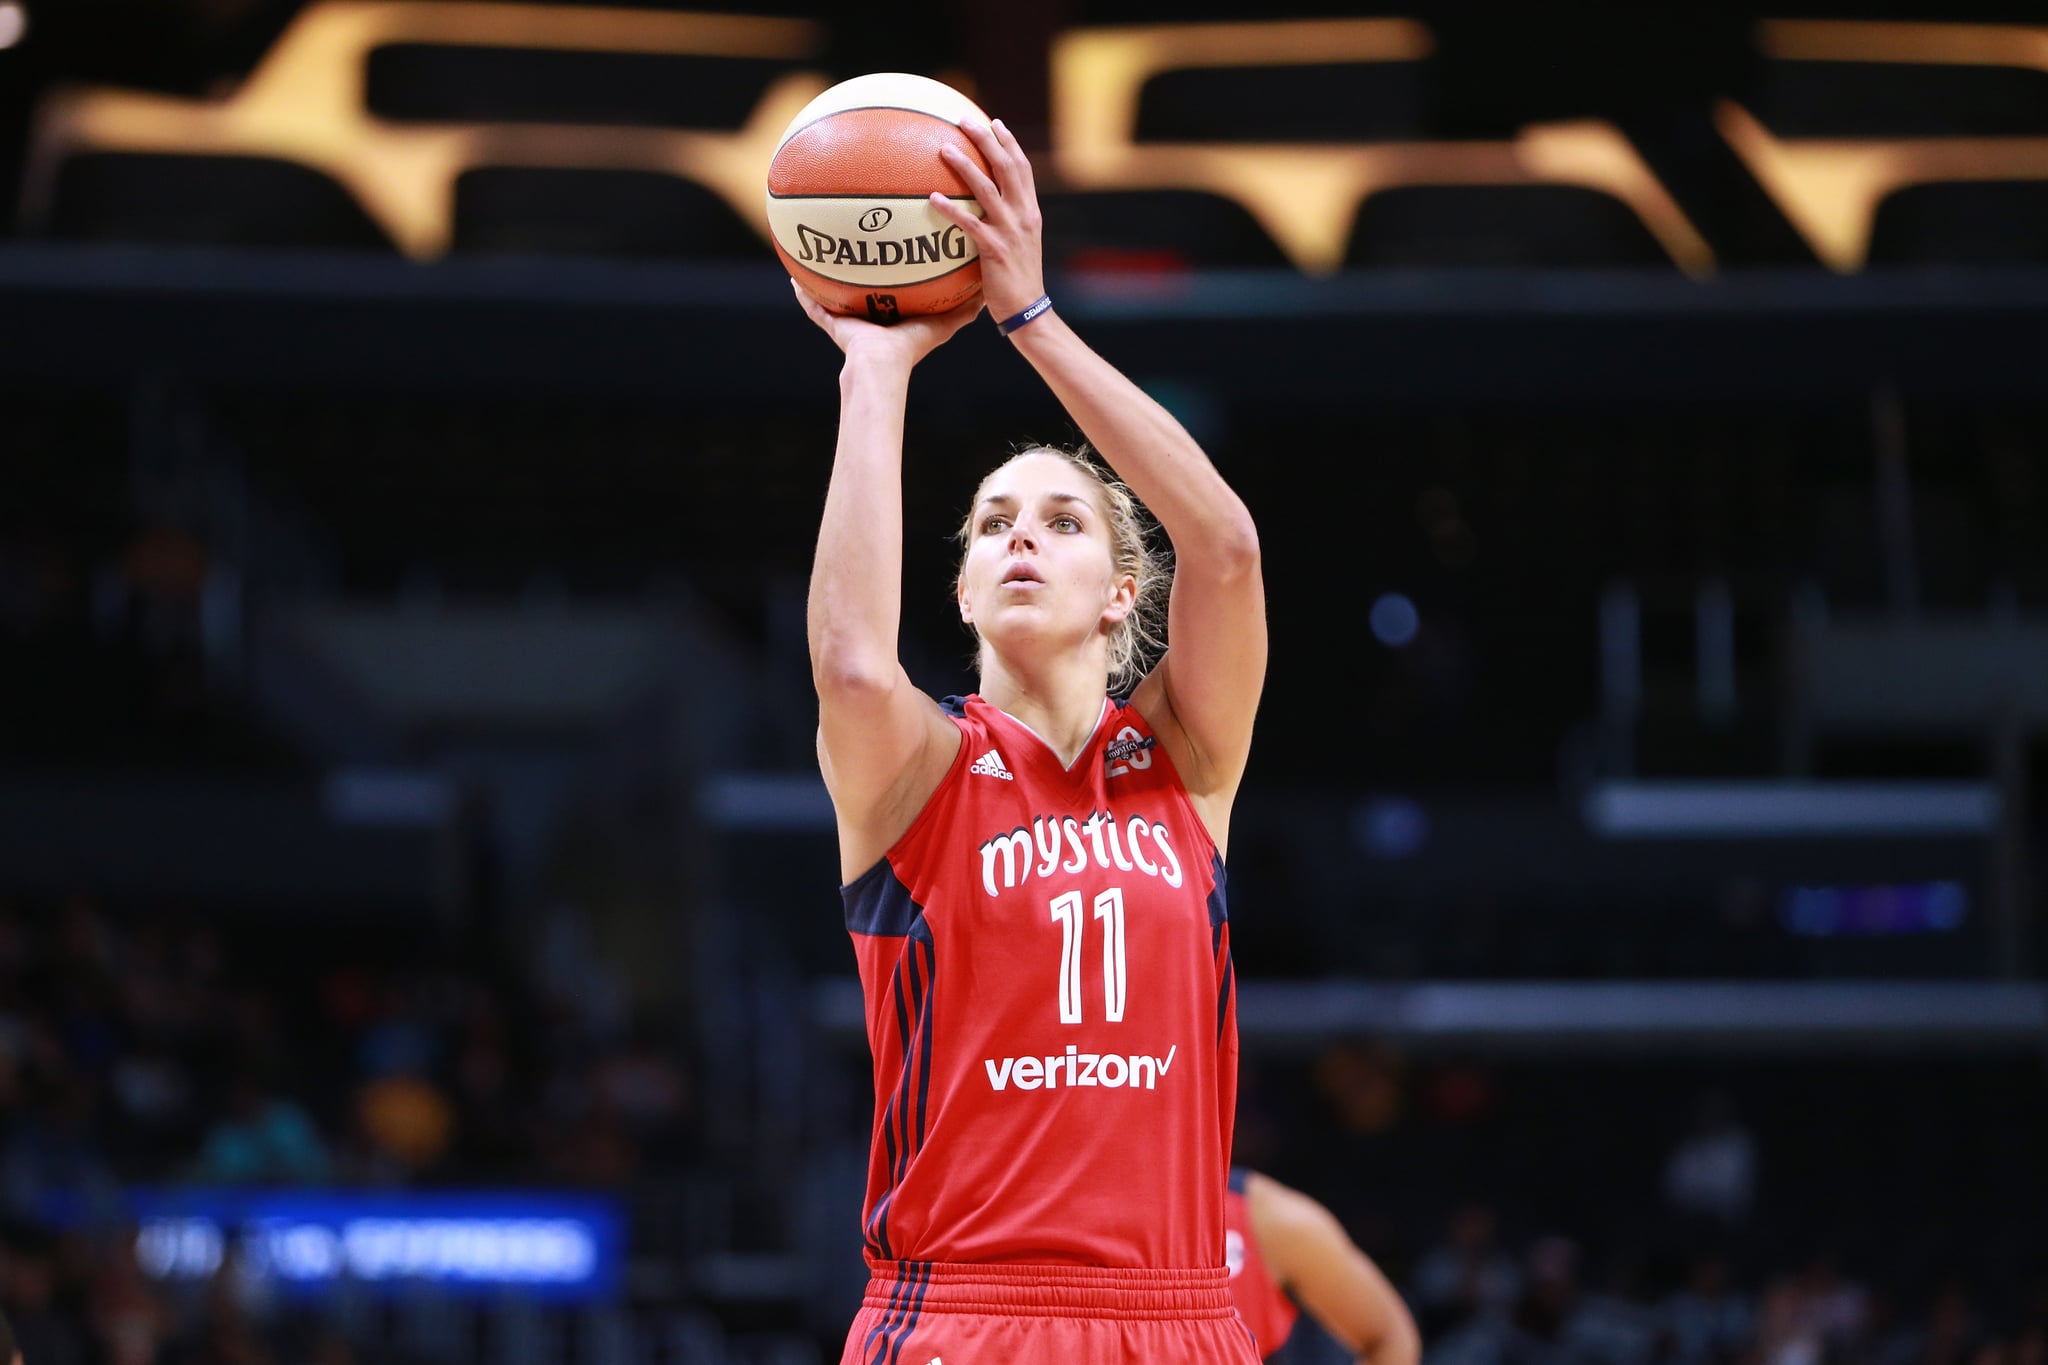 LOS ANGELES, CA - JULY 02:  Elena Delle Donne #11 of the Washington Mystics handles the ball against the Los Angeles Sparks during a WNBA basketball game at Staples Centre on July 2, 2017 in Los Angeles, California.  (Photo by Leon Bennett/Getty Images)